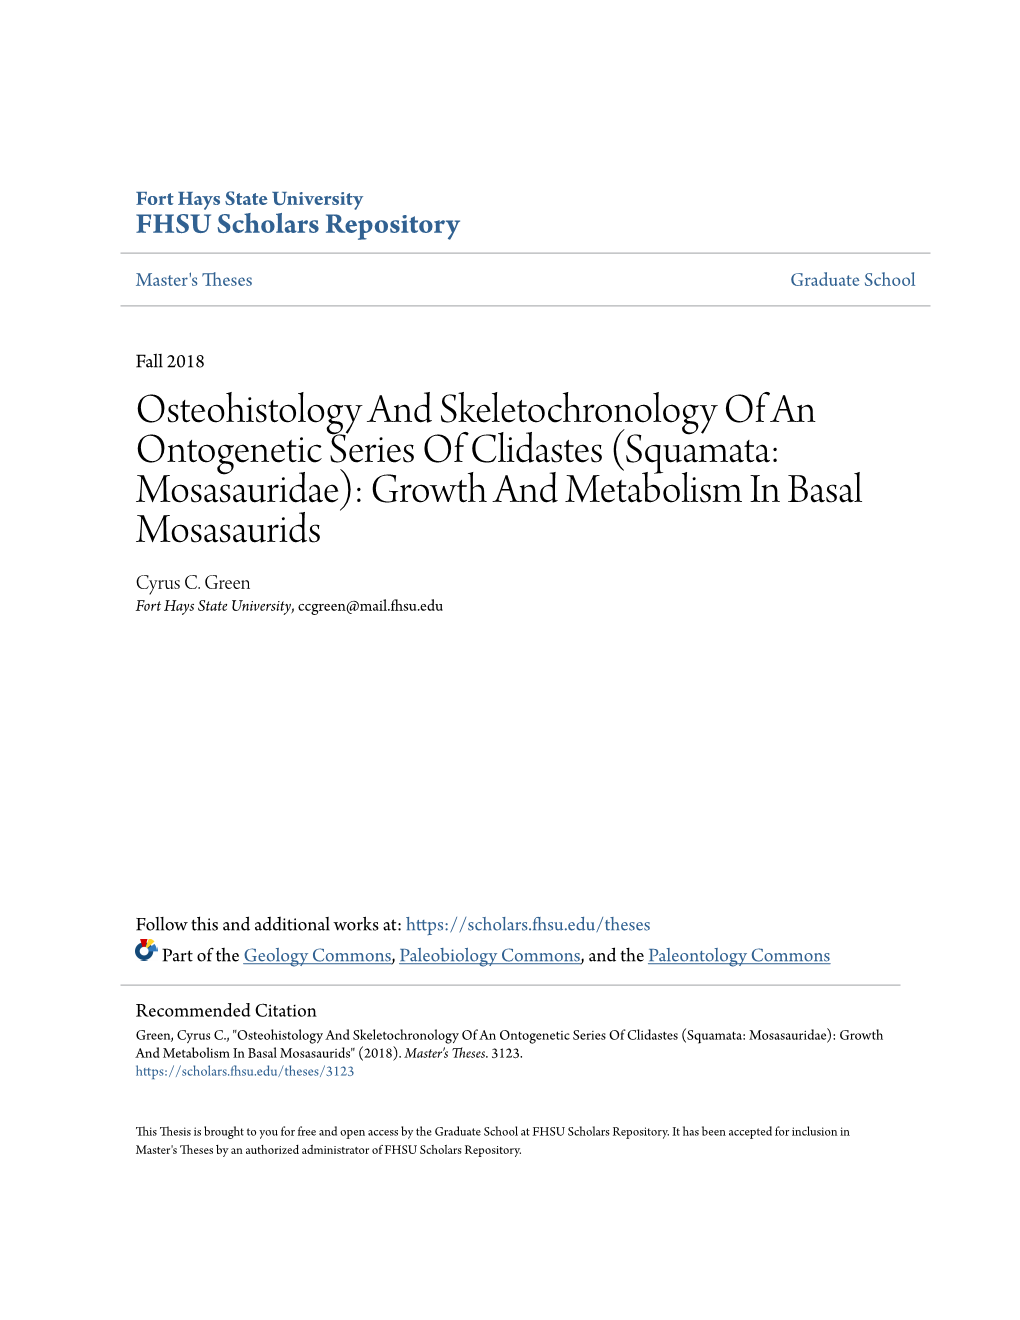 Osteohistology and Skeletochronology of an Ontogenetic Series of Clidastes (Squamata: Mosasauridae): Growth and Metabolism in Basal Mosasaurids Cyrus C